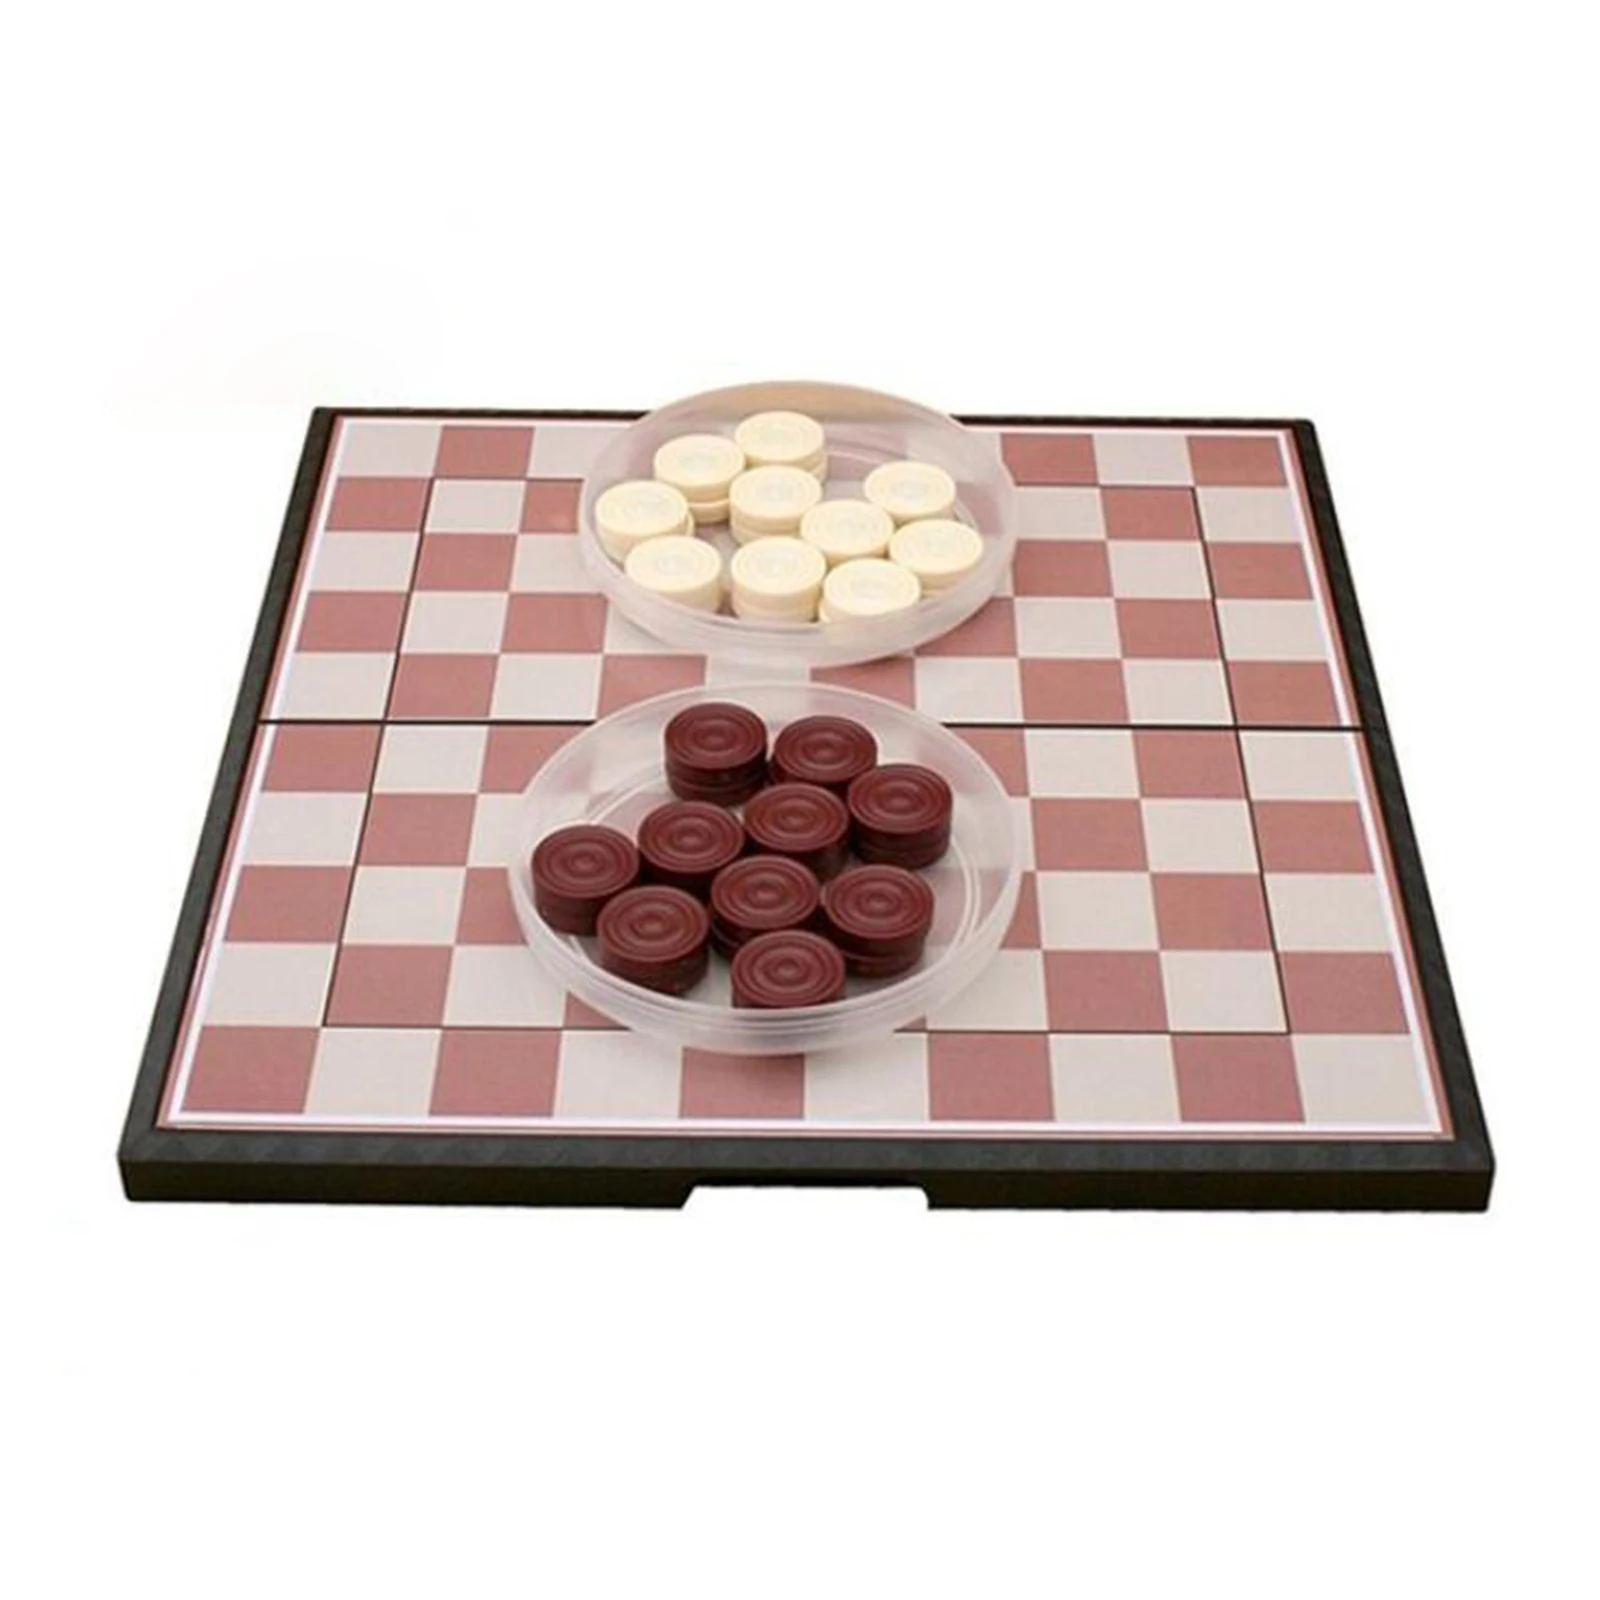 Checkers Board Game Set High-quality Magnetic Checkers Folding Checkerboard 27x27 CM Chessboard with Checkers Pieces